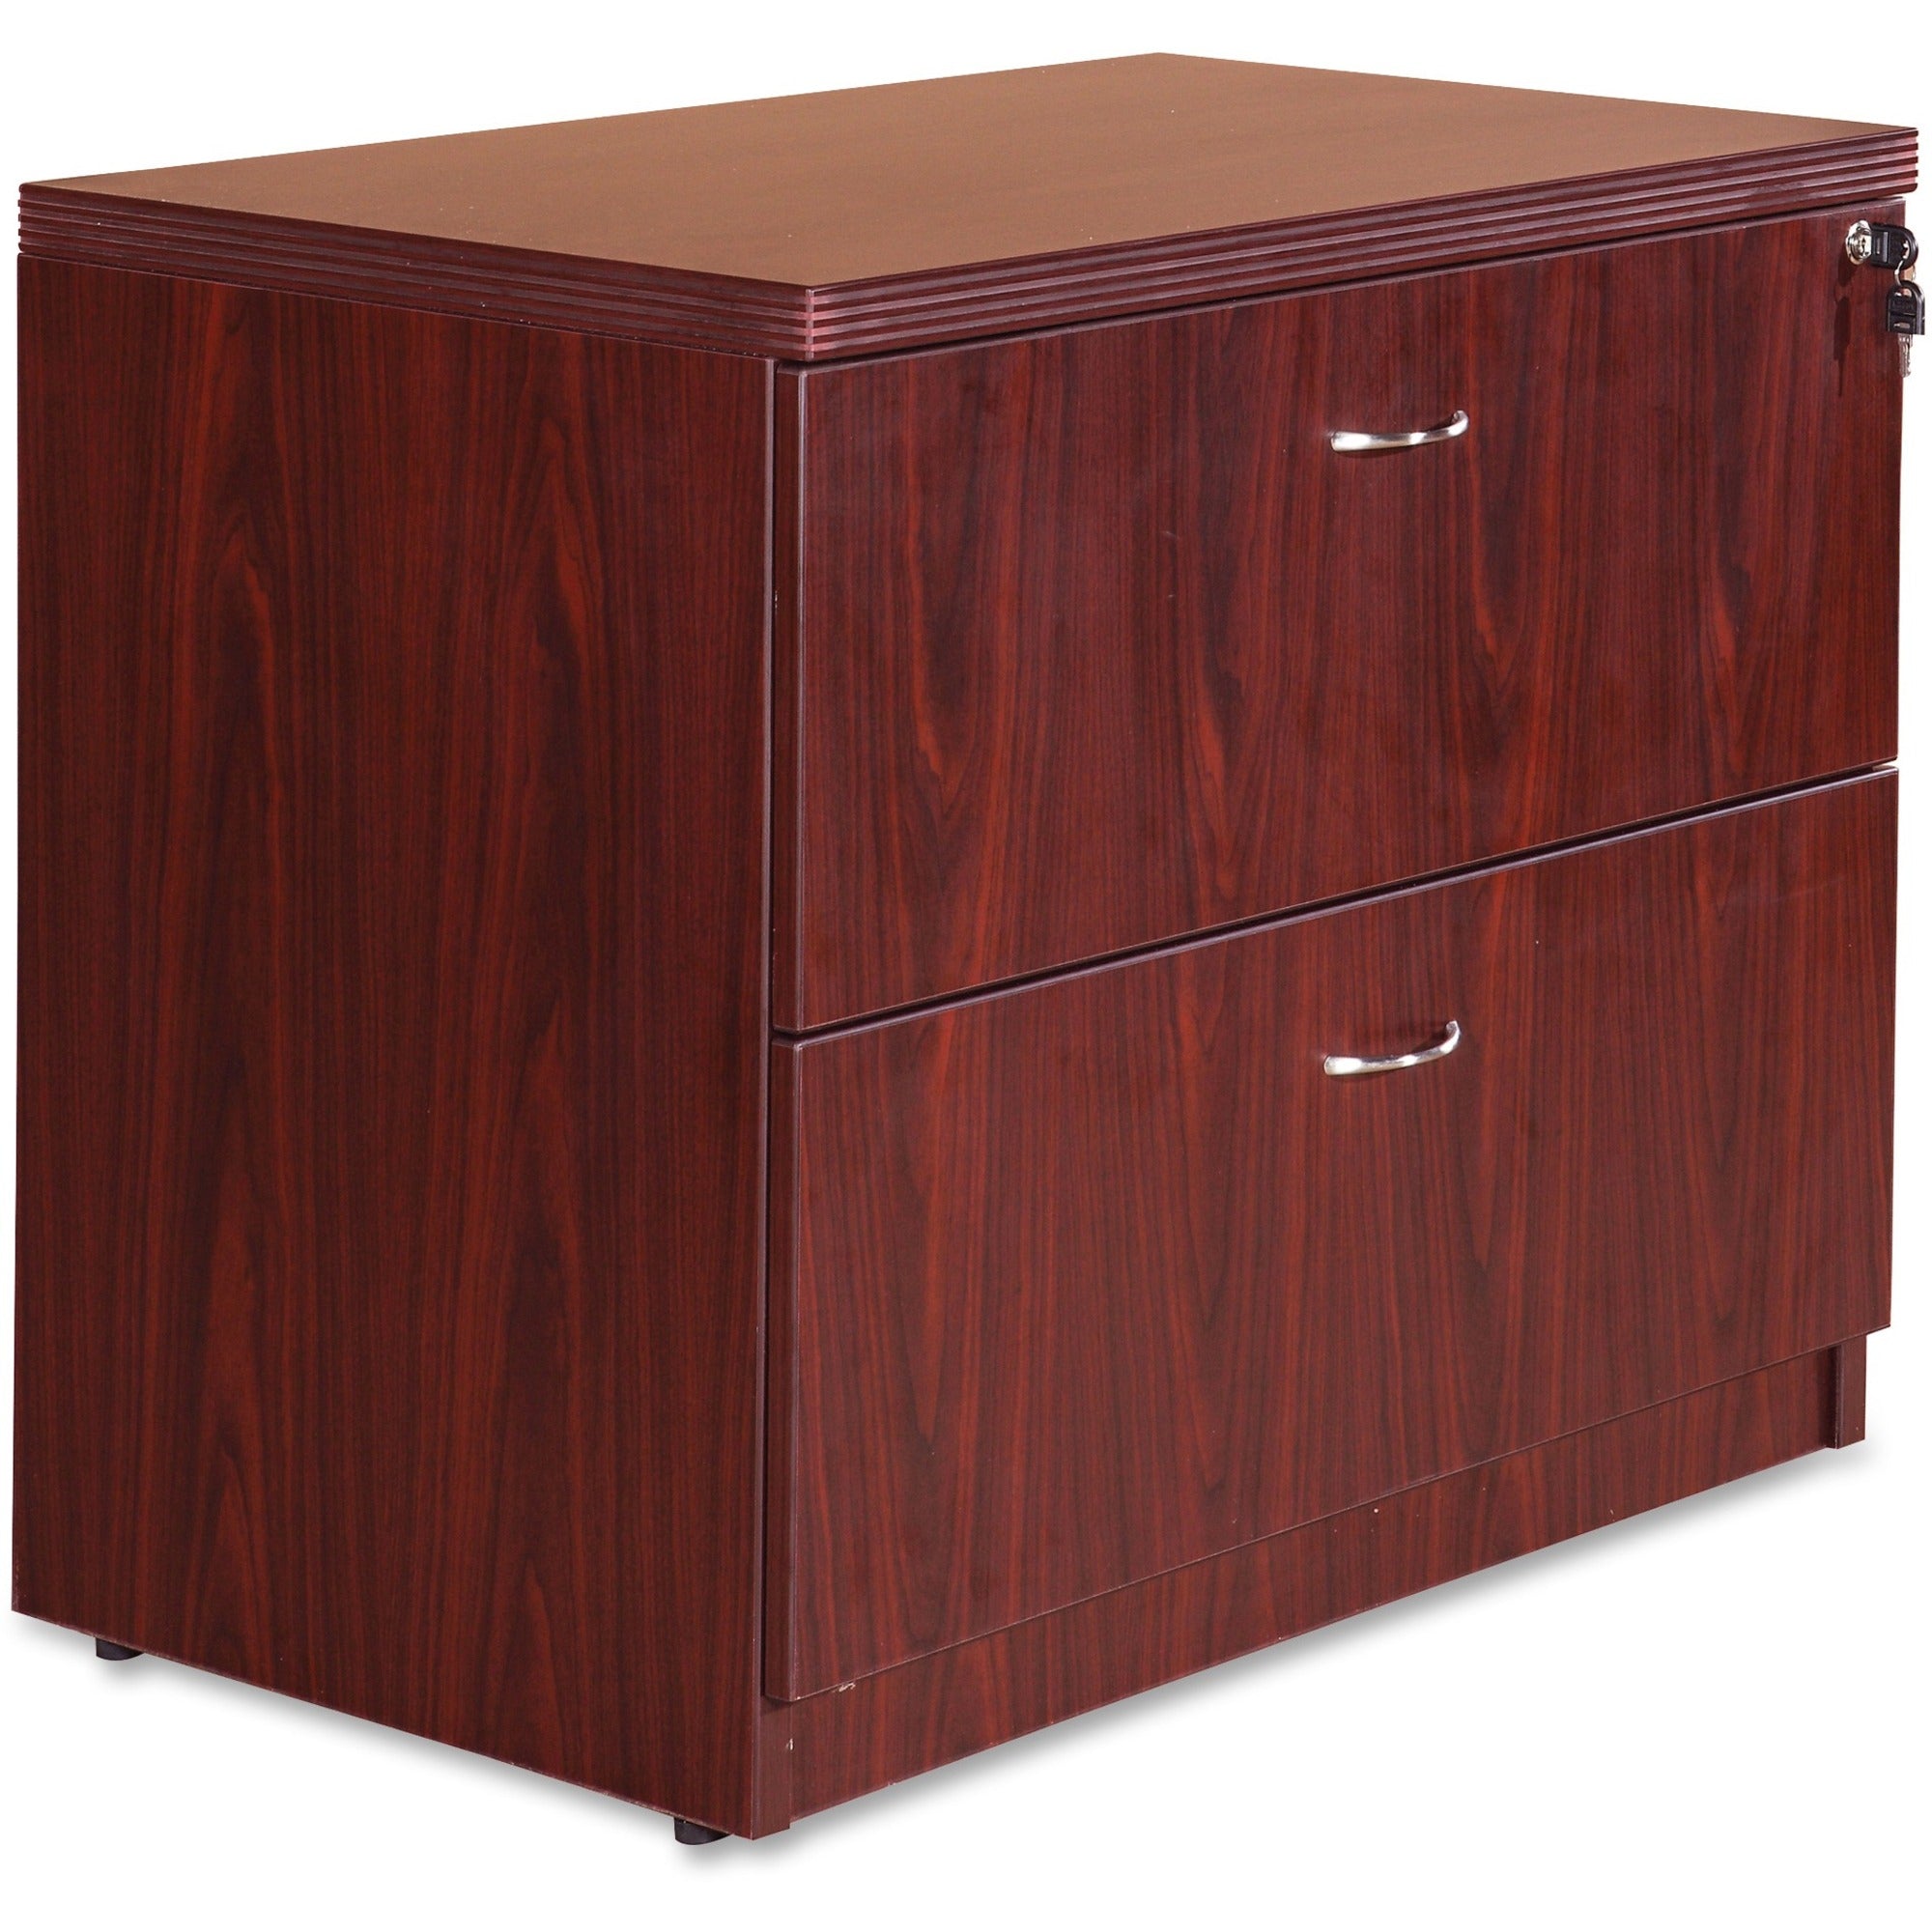 Lorell Chateau Series Lateral File - 2-Drawer - 36" x 22"30" Lateral File, 1.5" Top - 2 Drawer(s) - Reeded Edge - Material: Laminate - Finish: Mahogany - Durable, Heavy Duty, Ball-bearing Suspension - For Office, File, Supplies - 